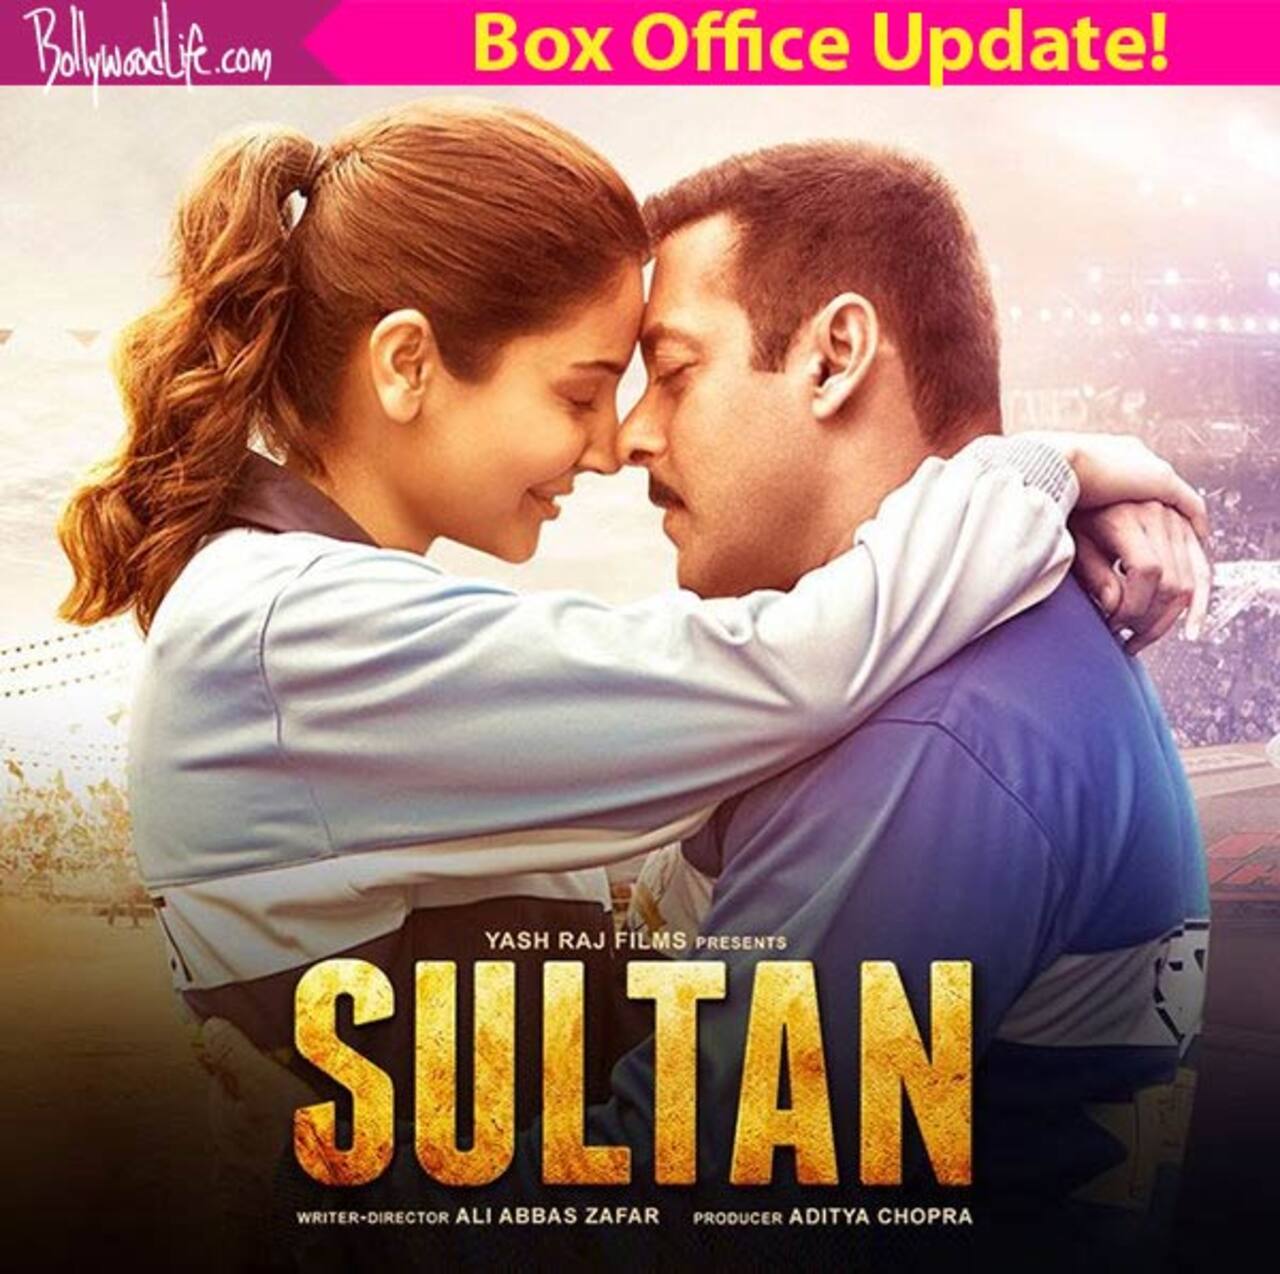 Salman Khan's Sultan box office collection week 3: The film is all set to enter the Rs 300 crore club!